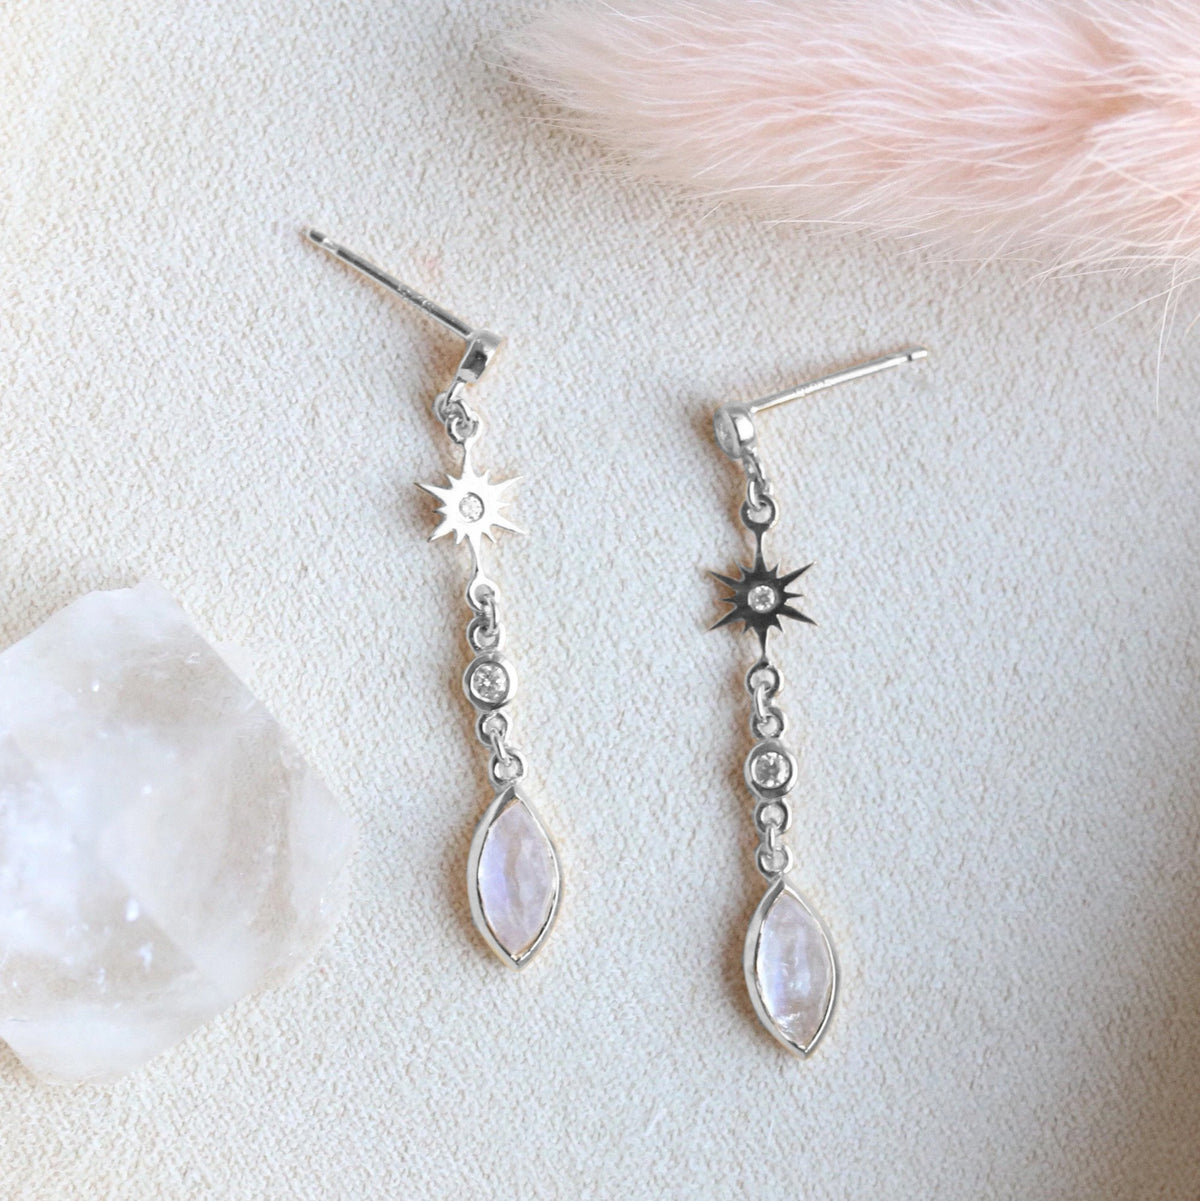 TINY BELIEVE MARQUISE DROP EARRINGS - CUBIC ZIRCONIA, MOONSTONE &amp; SILVER - SO PRETTY CARA COTTER